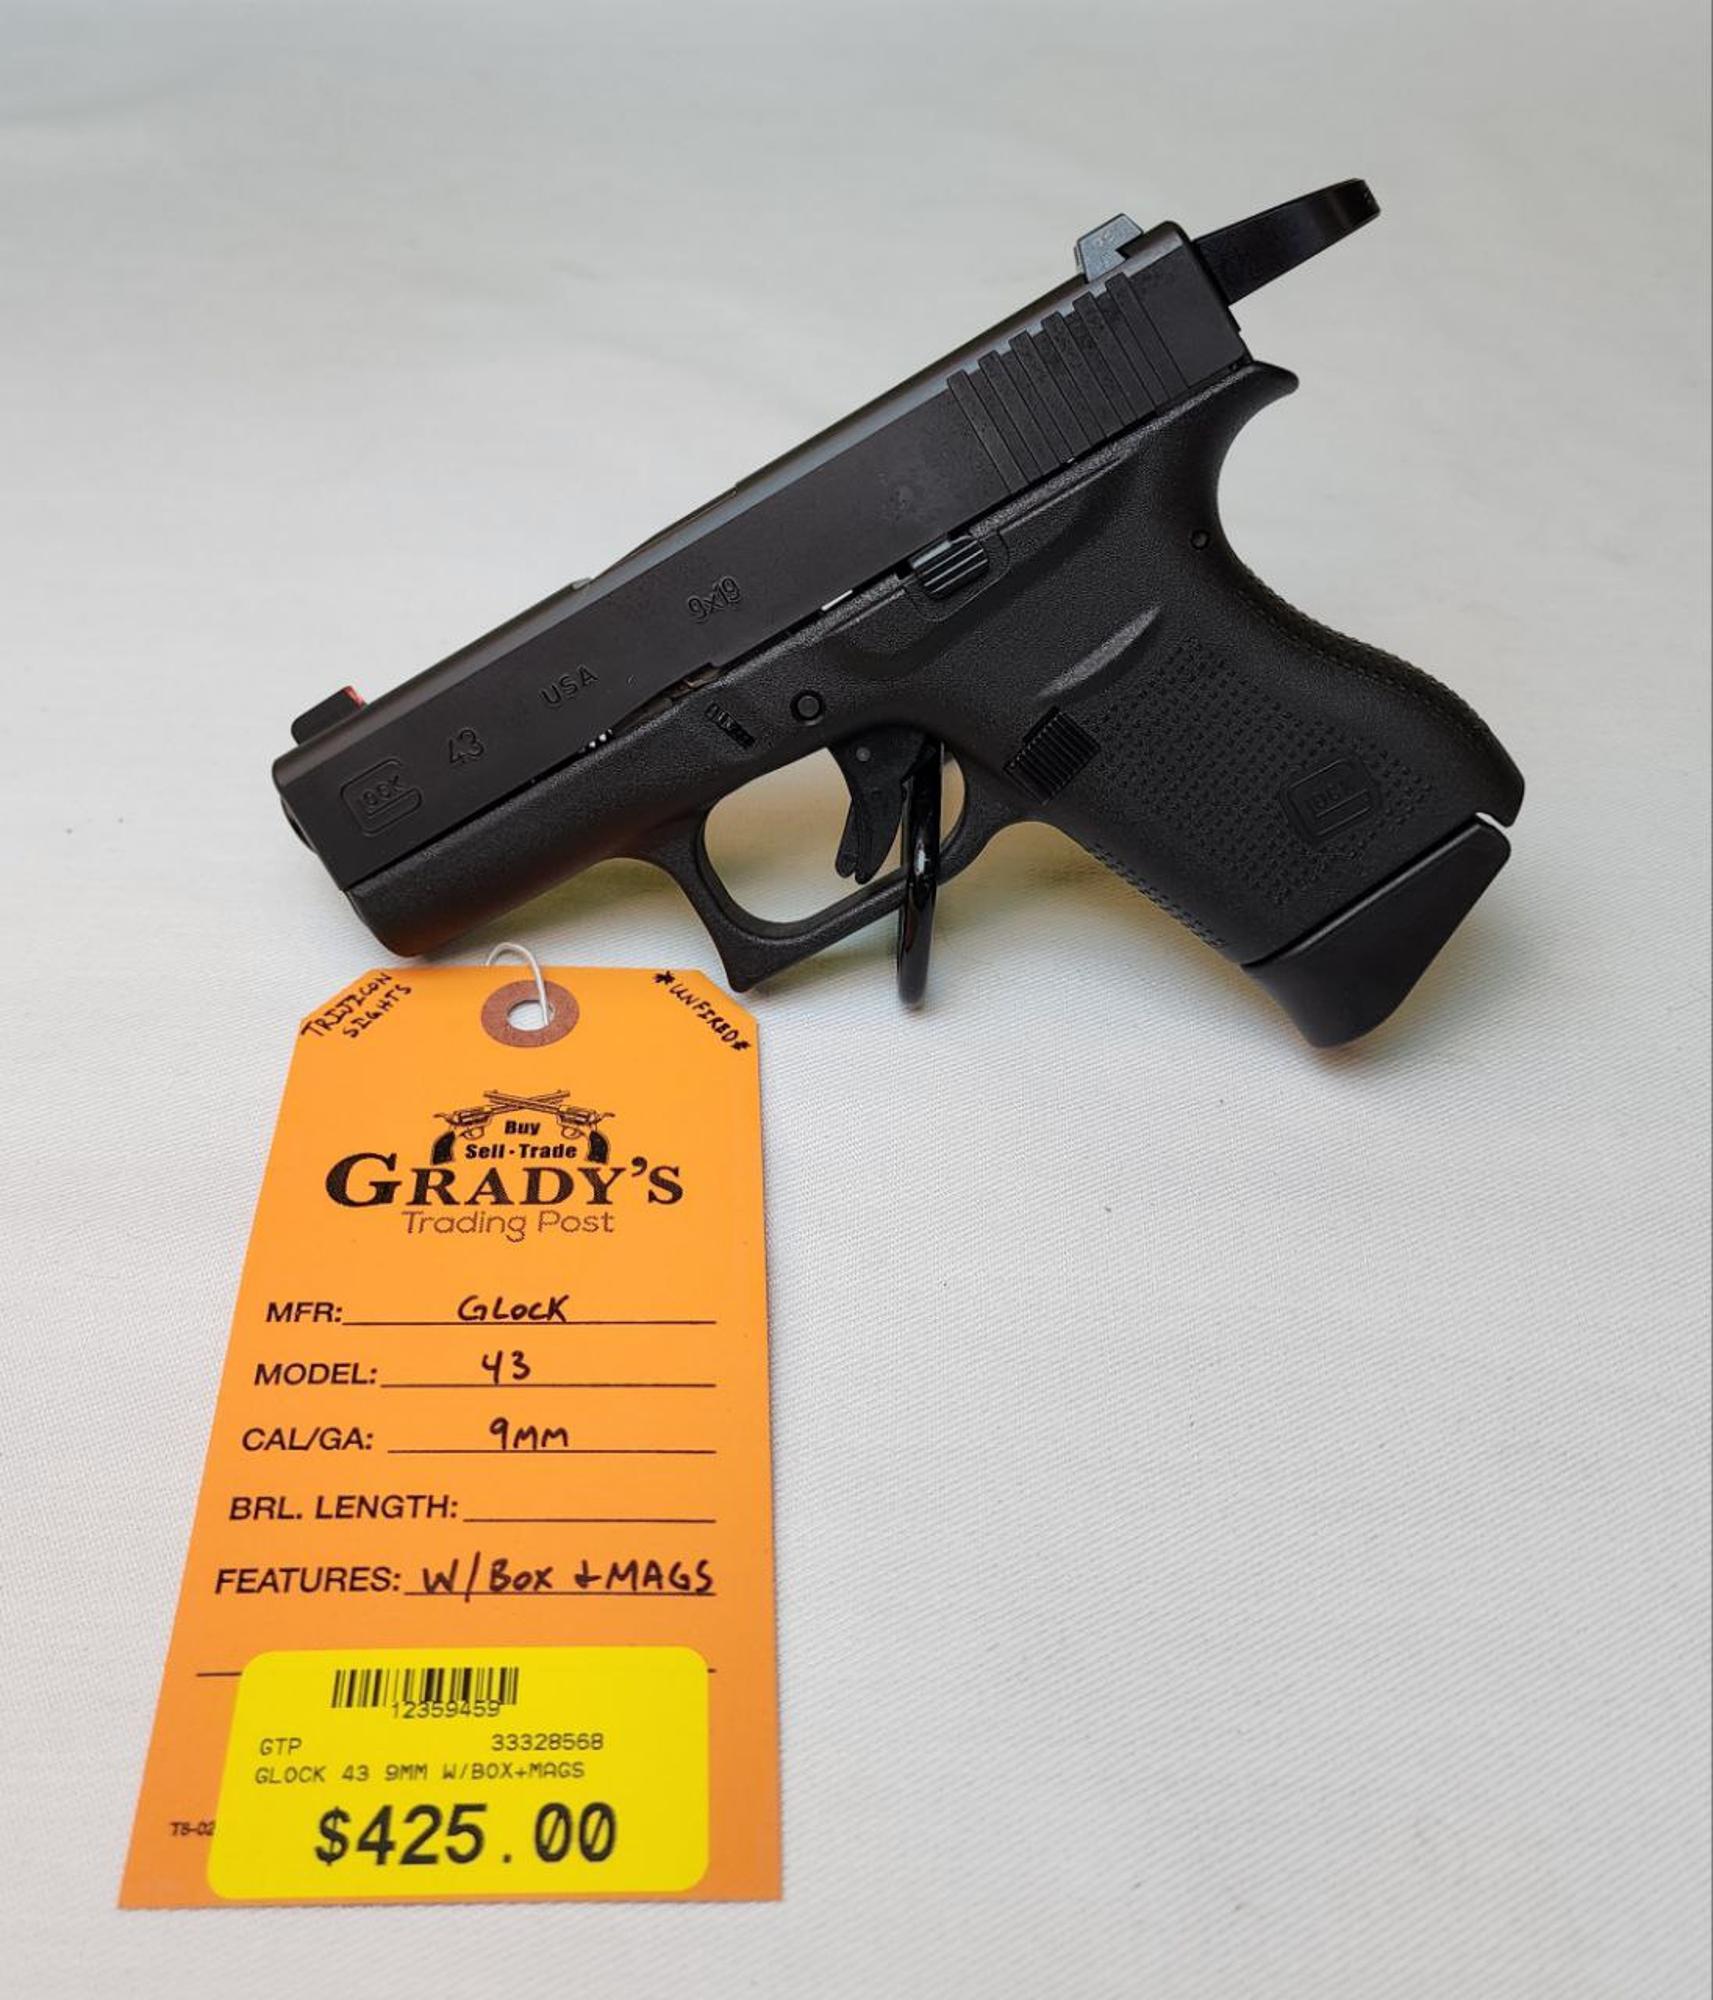 GLOCK 43 9MM W/BOXMAGS  | 9 MM LUGER | 33328568 | 12359459